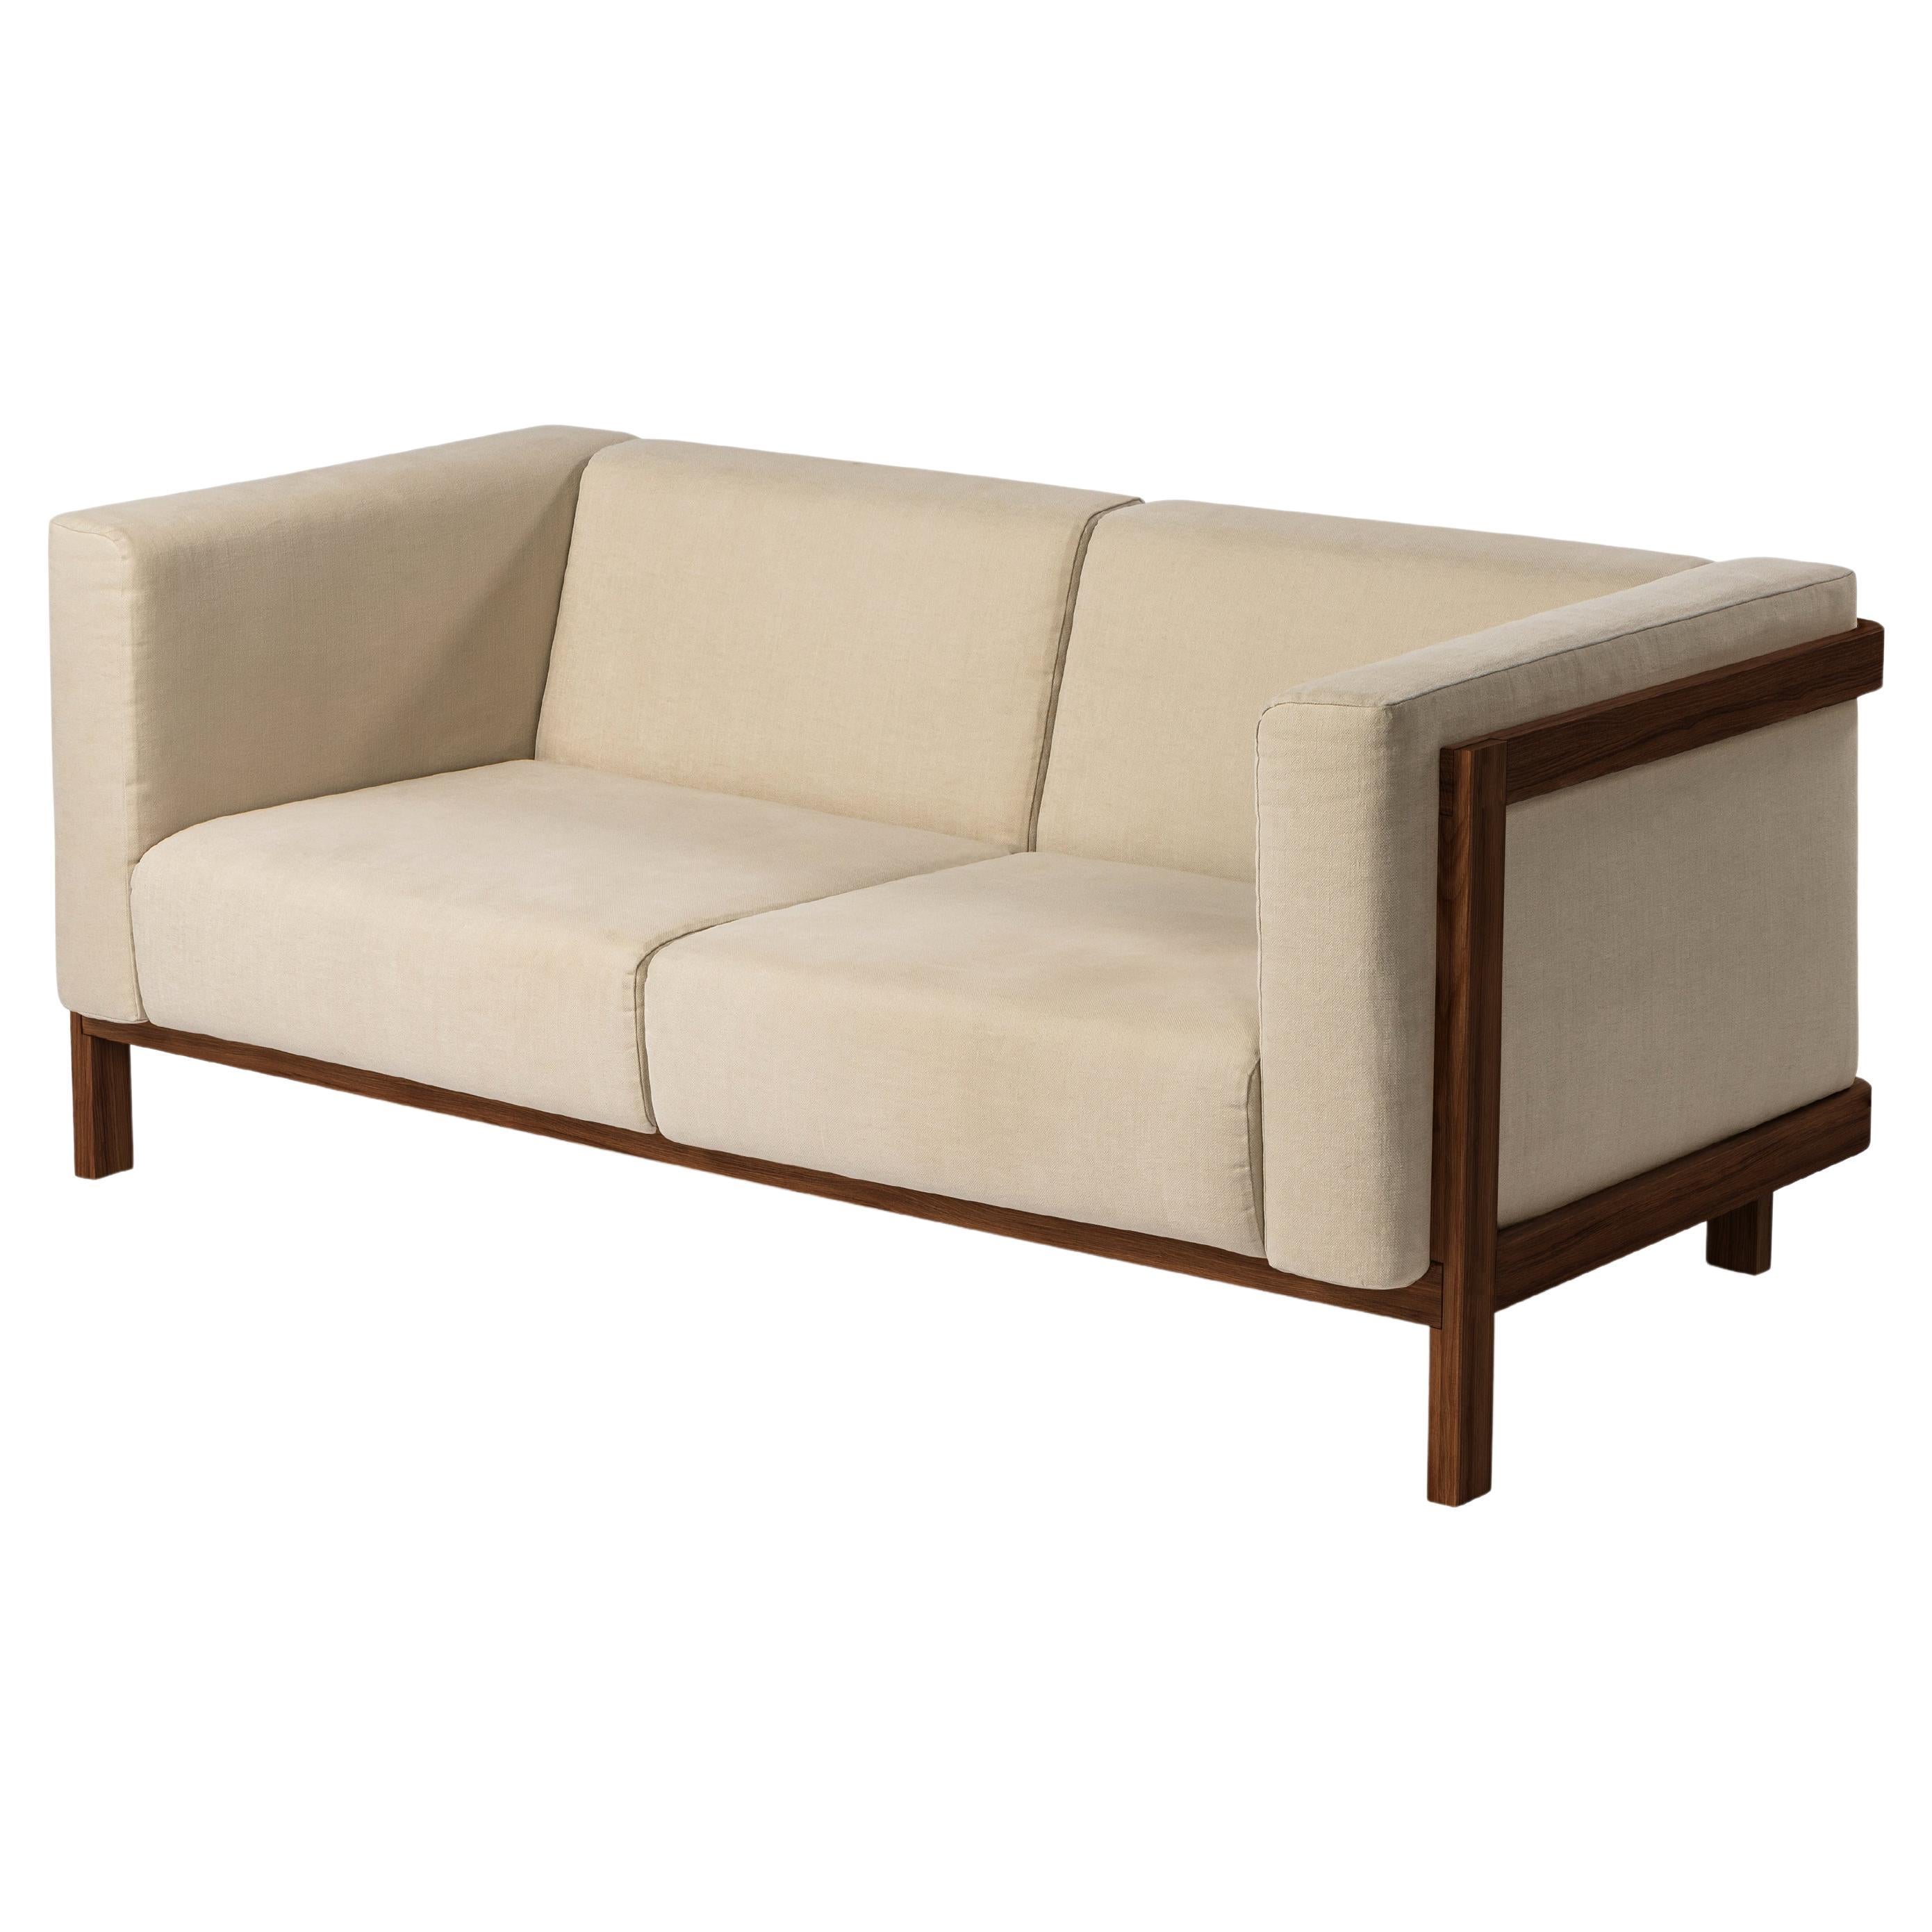 Minimalist two seater sofa walnut - fabric upholstered For Sale